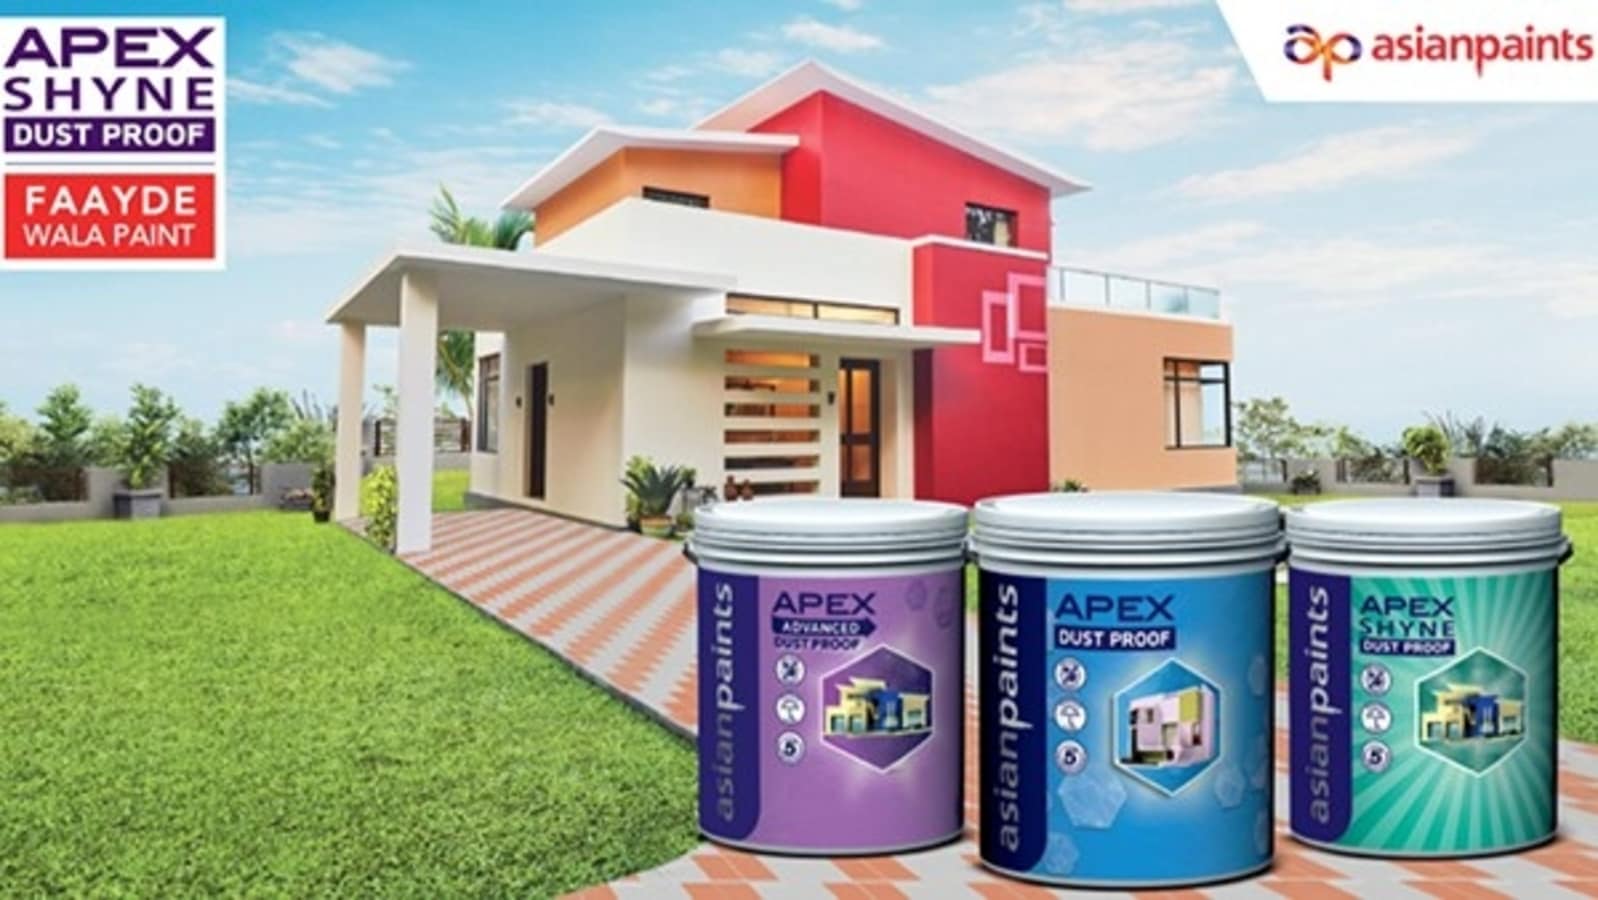 No Dust, Only Shine: Your House Needs Asian Paints' Apex Shyne ...